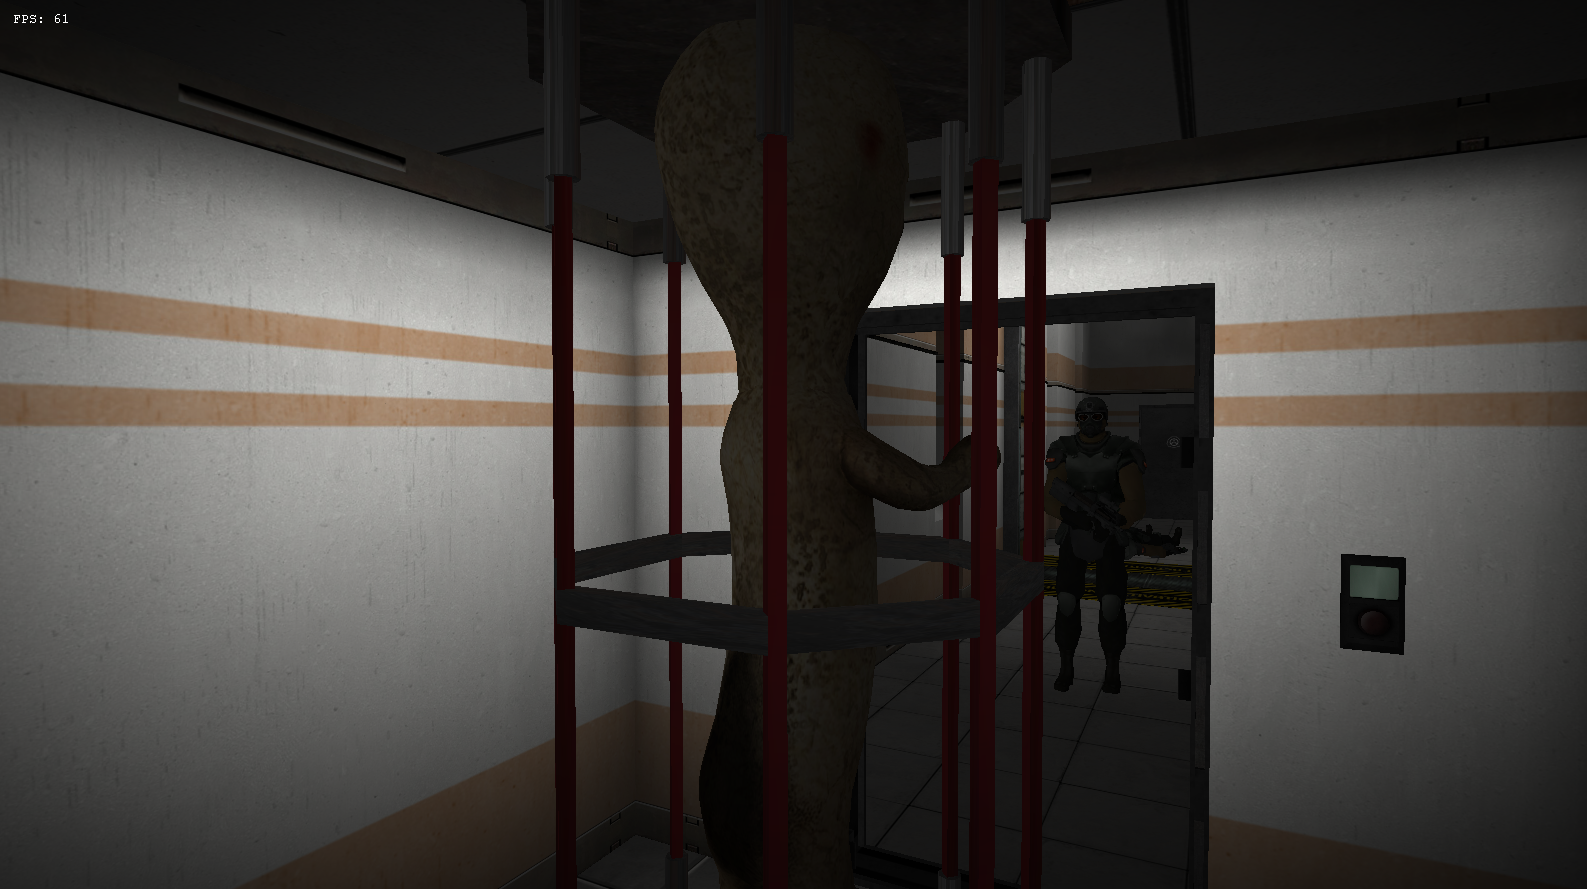 mad cuz bad on Game Jolt: This is the 2 Scp I came across in containment  breach first was 173